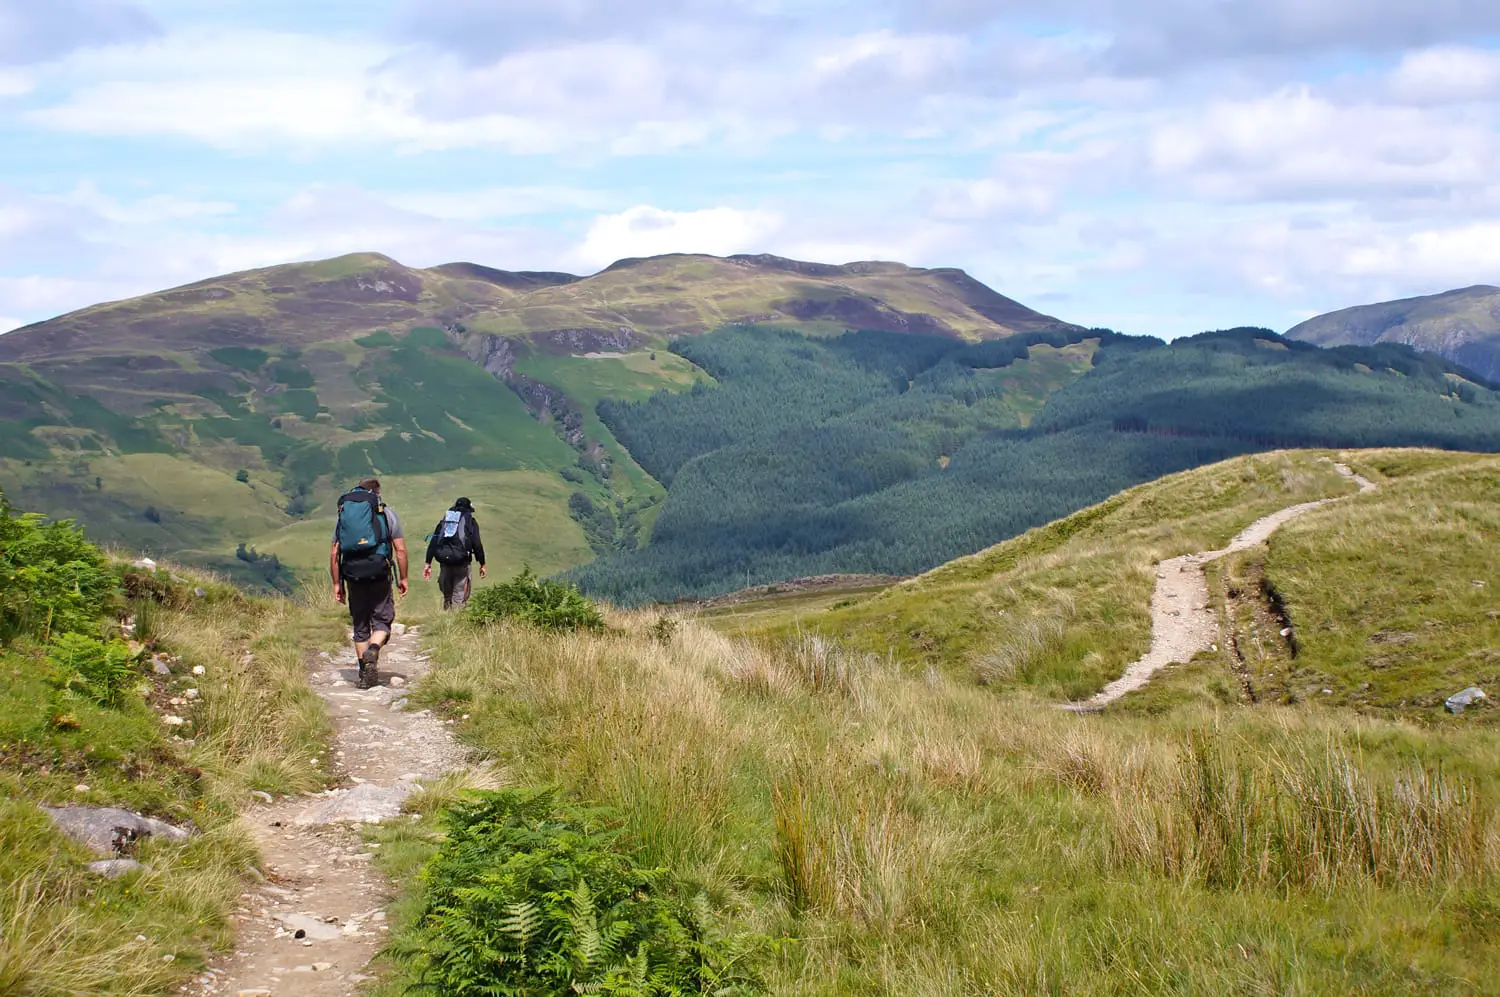 Hikers at The West Highland Way in Scotland, UK